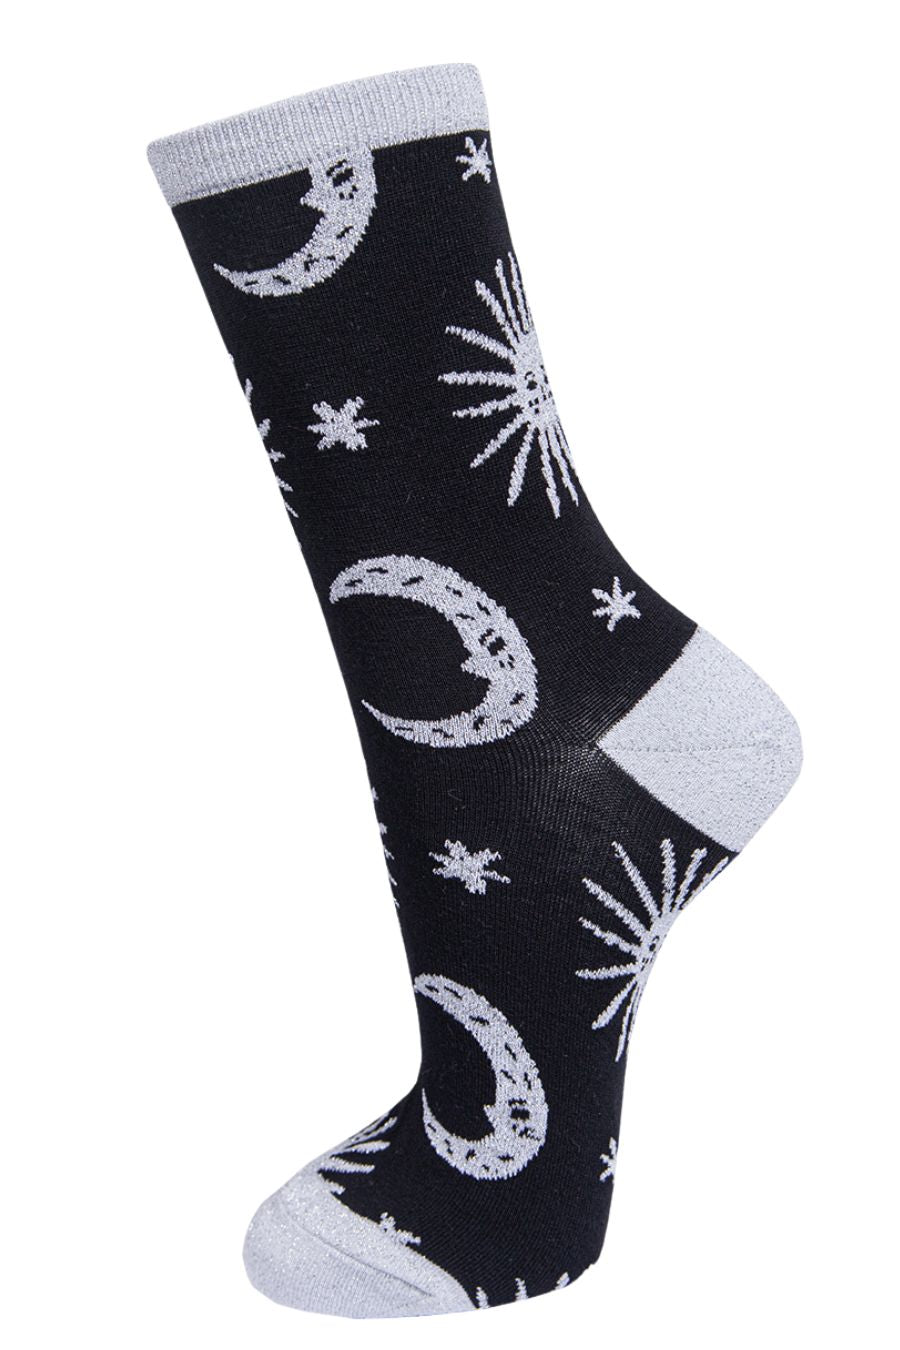 black, silver glitter ankle socks with stars and moons on them